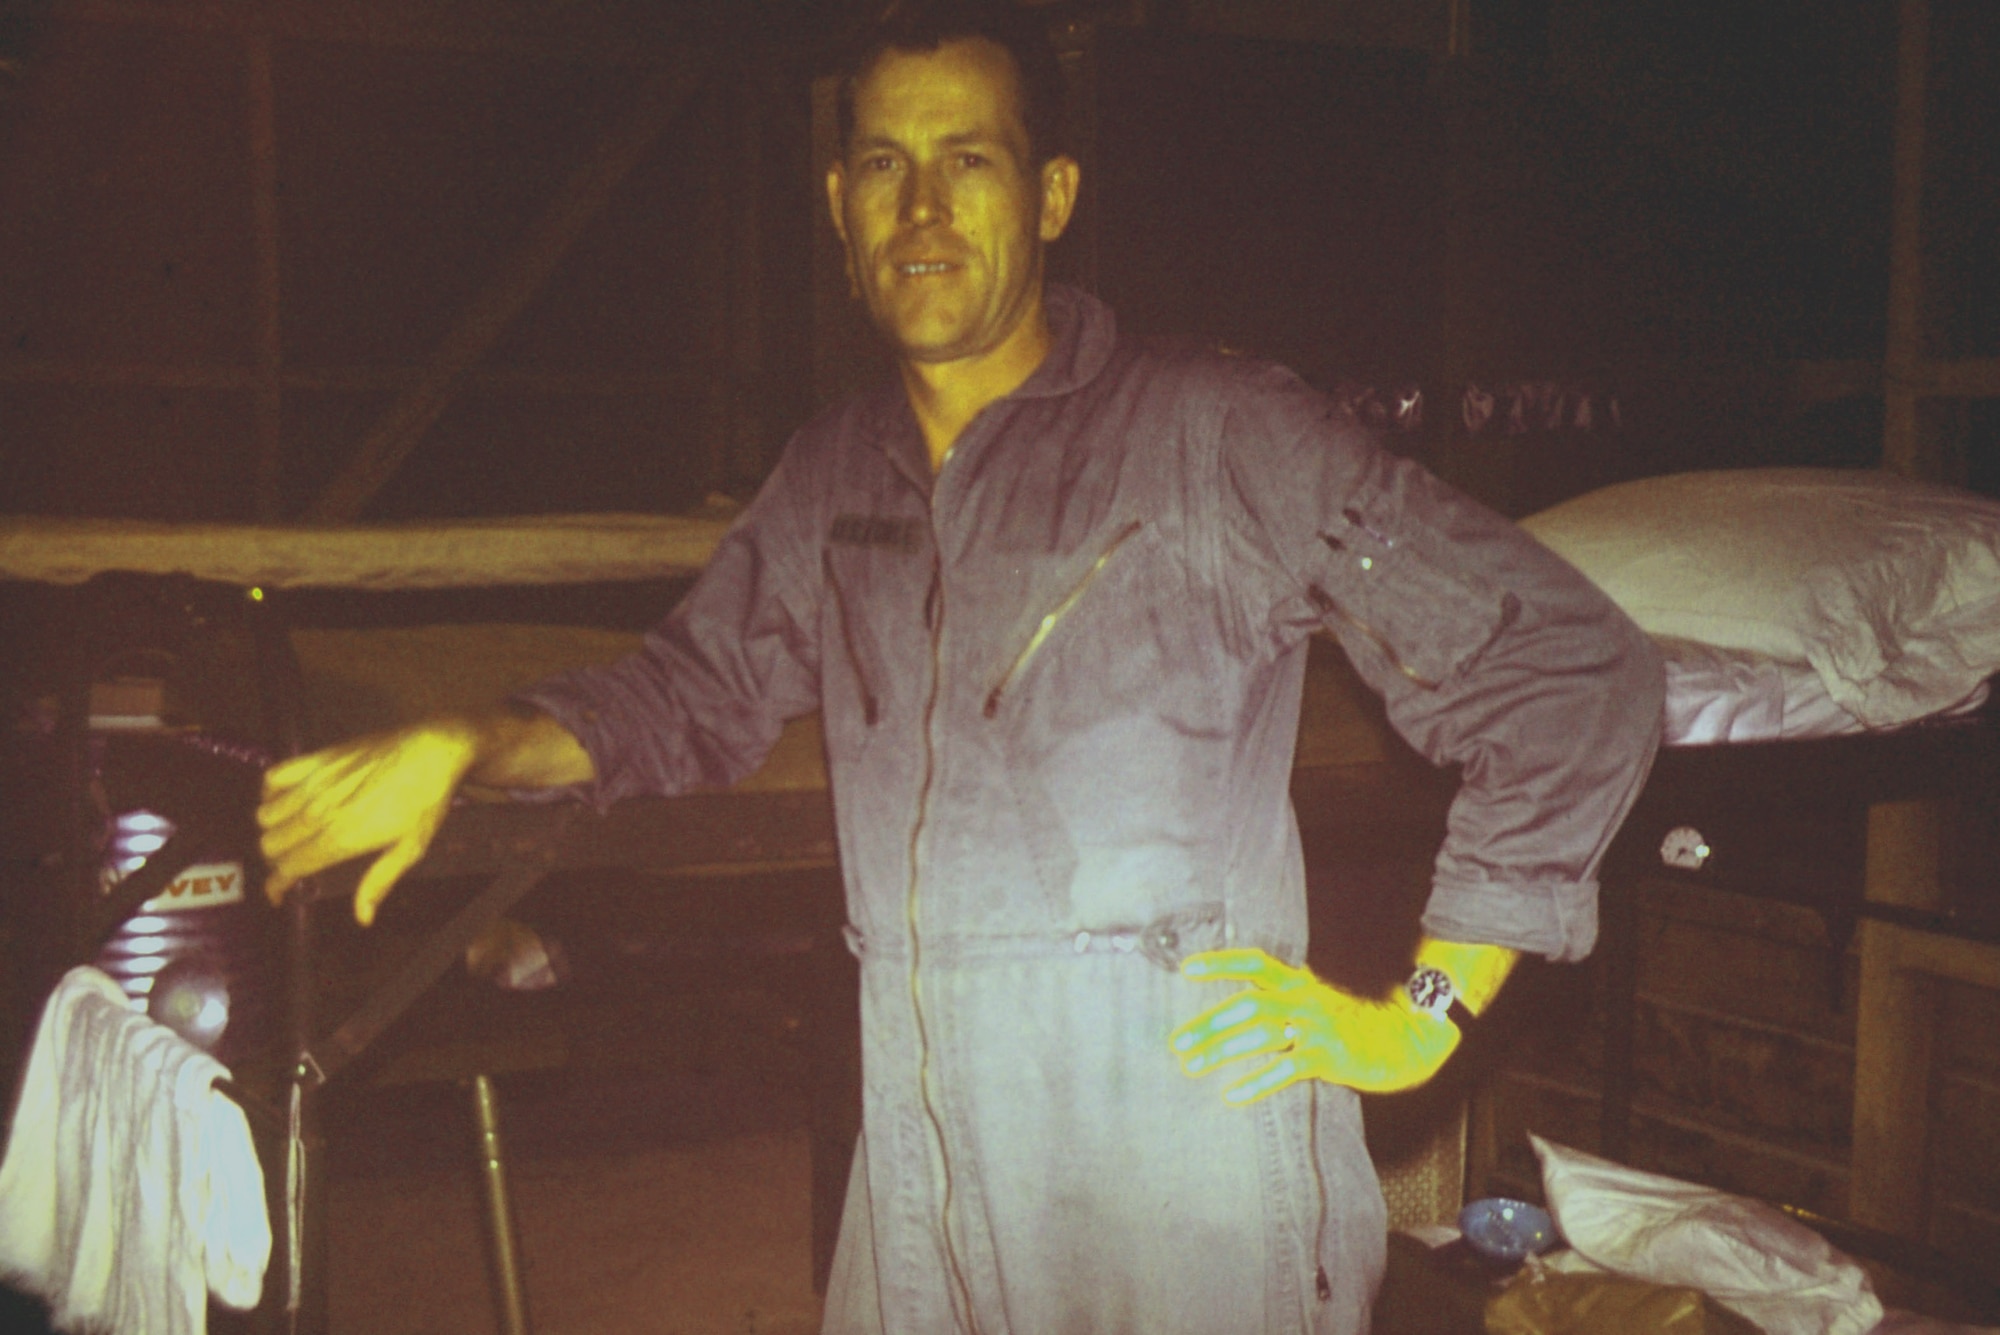 Maj. Robert F. Woods stands next to his bunk at Da Nang Air Base, Vietnam in 1968.  On June 26, 1968, Major Woods disappeared in the Quang Binh Province in Vietnam after the 02-A Skymaster he was flying crashed in a remote mountainous region.  A native of Salt Lake City, Utah, Major Woods was in the military for 20 years when he disappeared. His career began in June 1948 as an enlisted aircrew member on a C-74 Globemaster in the Berlin Airlift.  In 1951 he became an officer and a pilot flying KC-97 Stratotankers in the Korean Conflict.  In Vietnam, he served as a forward air controller in the Skymaster with the 20th Tactical Air Support Squadron in DaNang Air Base, South Vietnam. He earned his first of eight Air Medals in Korea and also earned the Distinguished Flying Cross and Bronze Star for his service in Vietnam.  On April 9, 2008, he was laid to rest at Arlington National Cemetery nearly 40 years after he disappeared.  (Photo courtesy of the Woods family)  